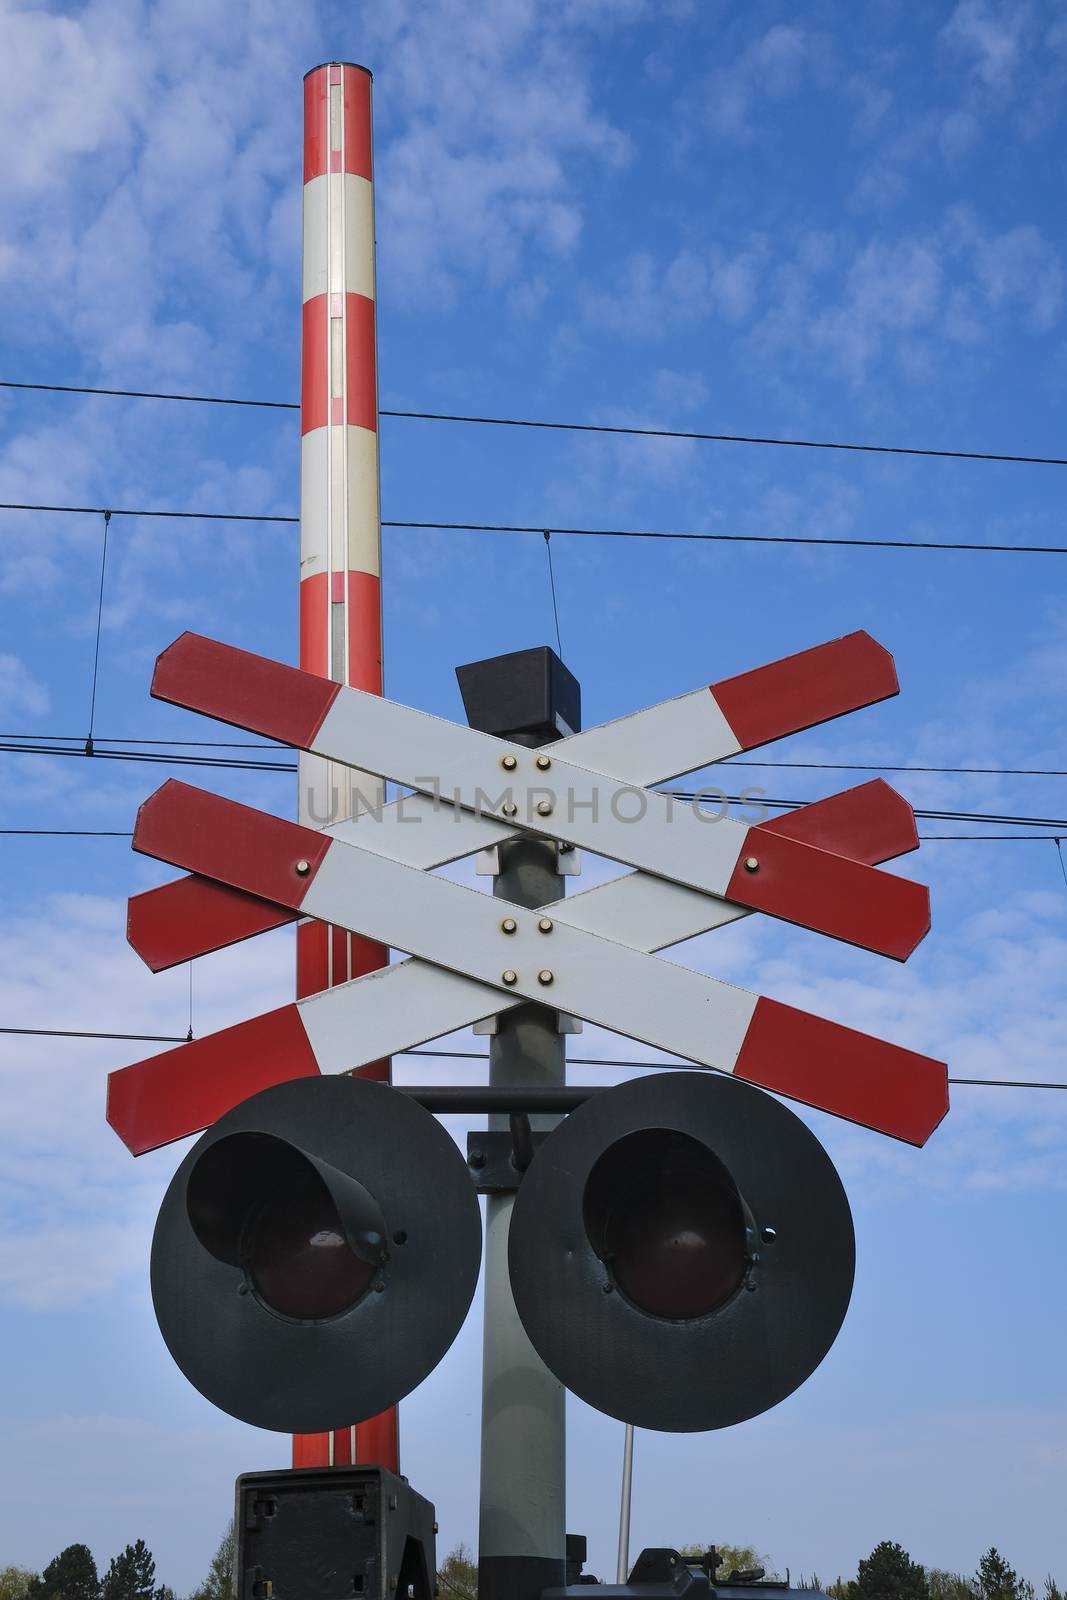 Road signs at the railway crossing with a barrier. Organization  by Tjeerdkruse